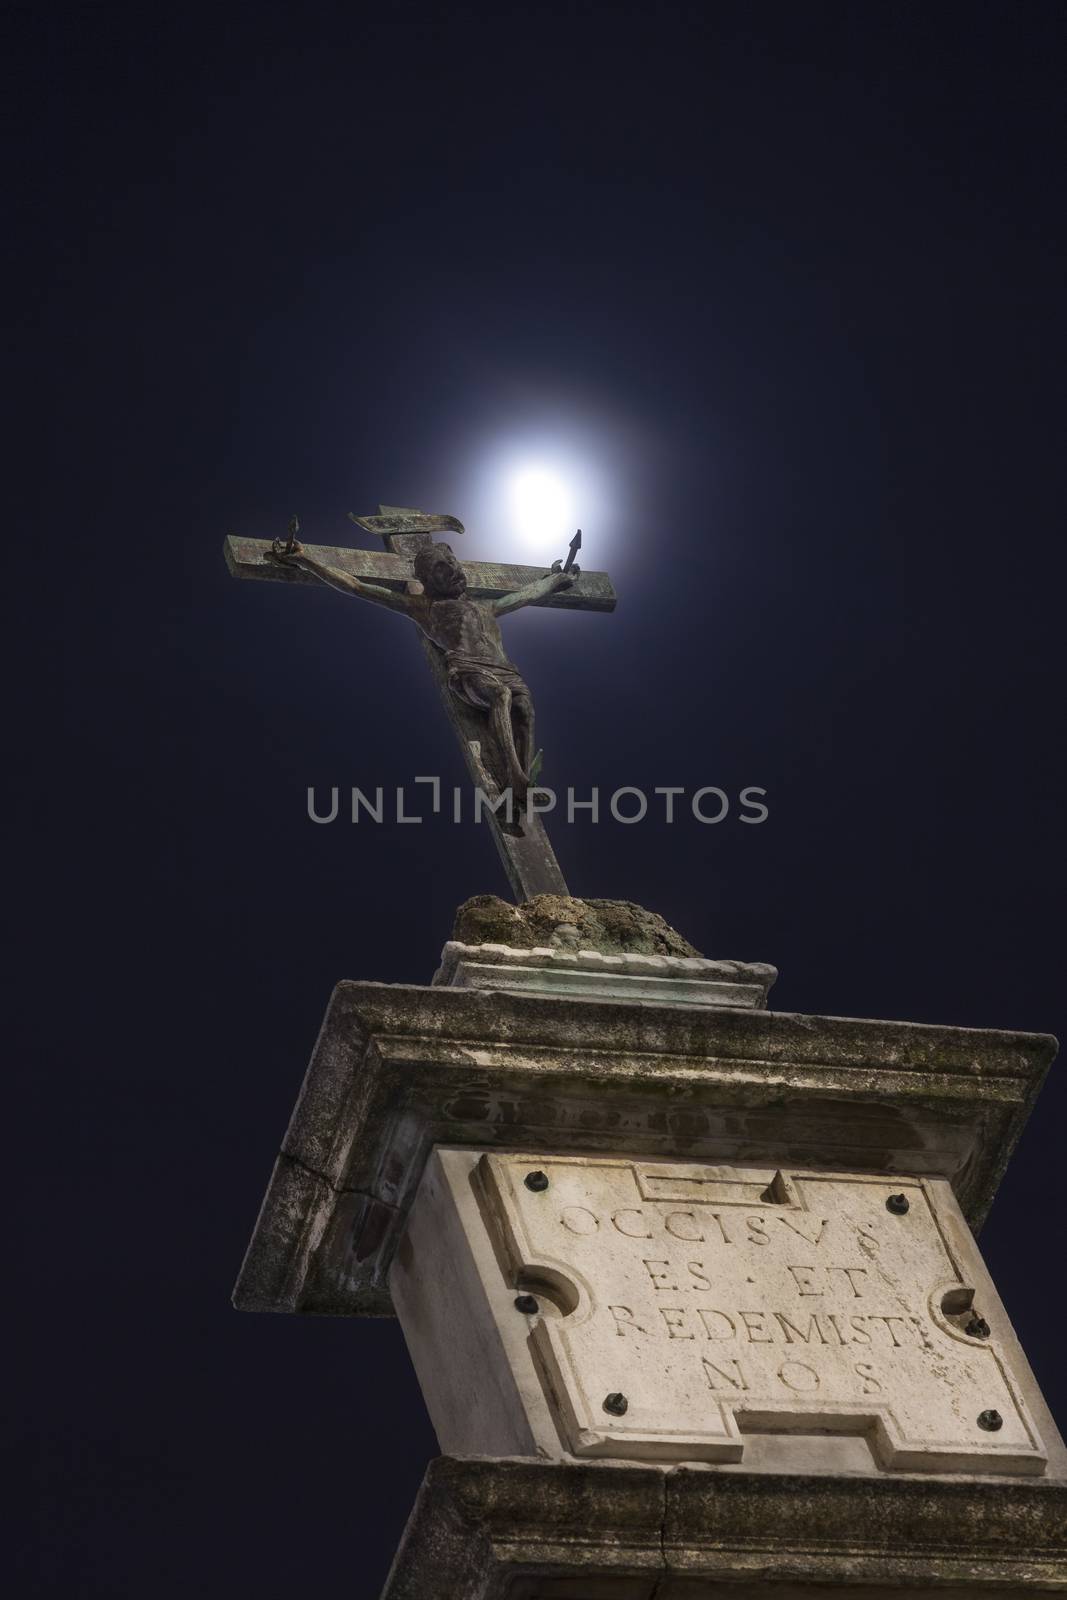 A statue of Jesus crucified illuminated by the moon, Monza, Italy